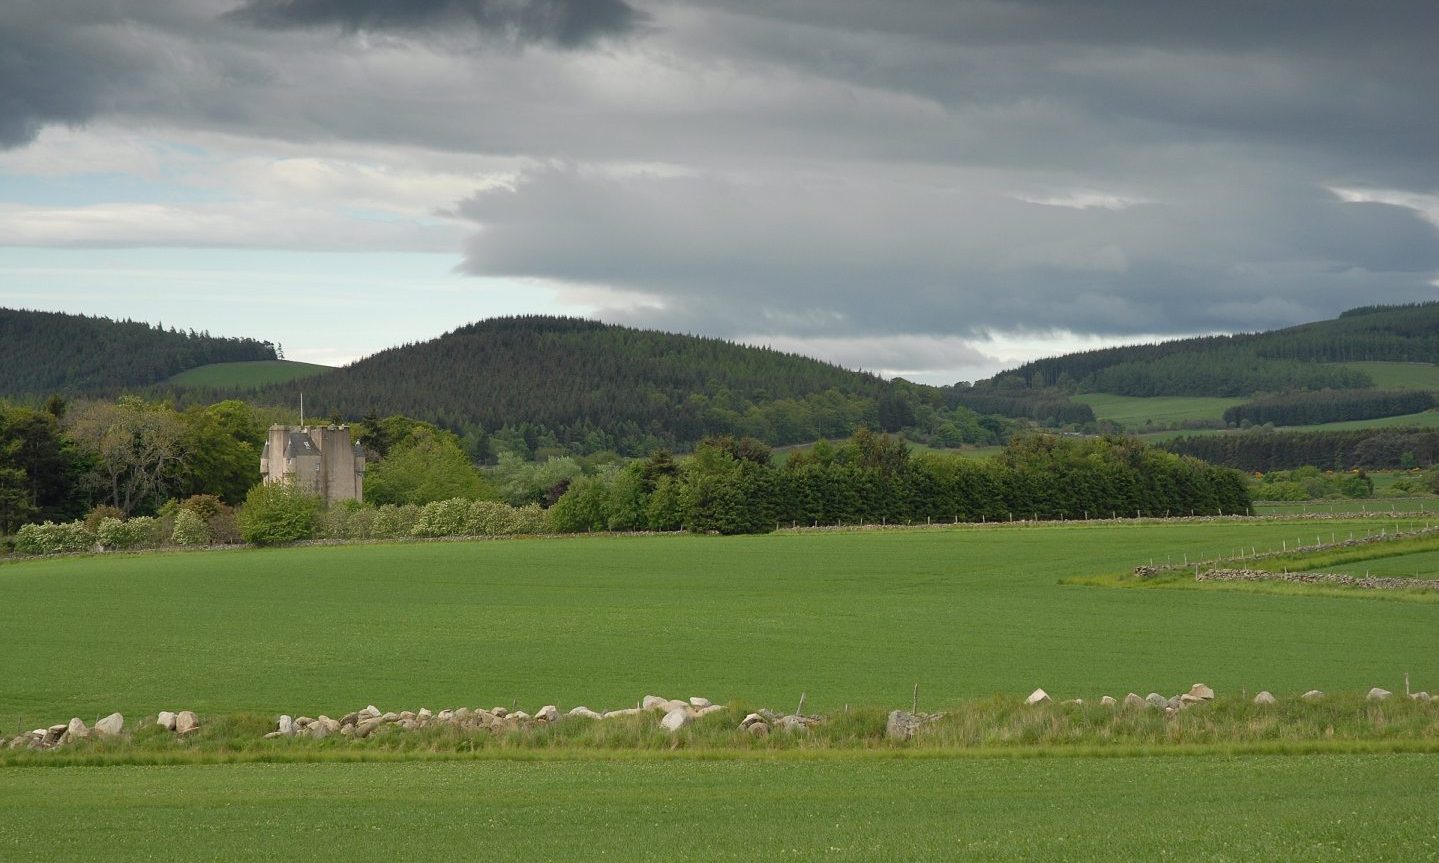 The castle from a distance, surrounded by trees and fields